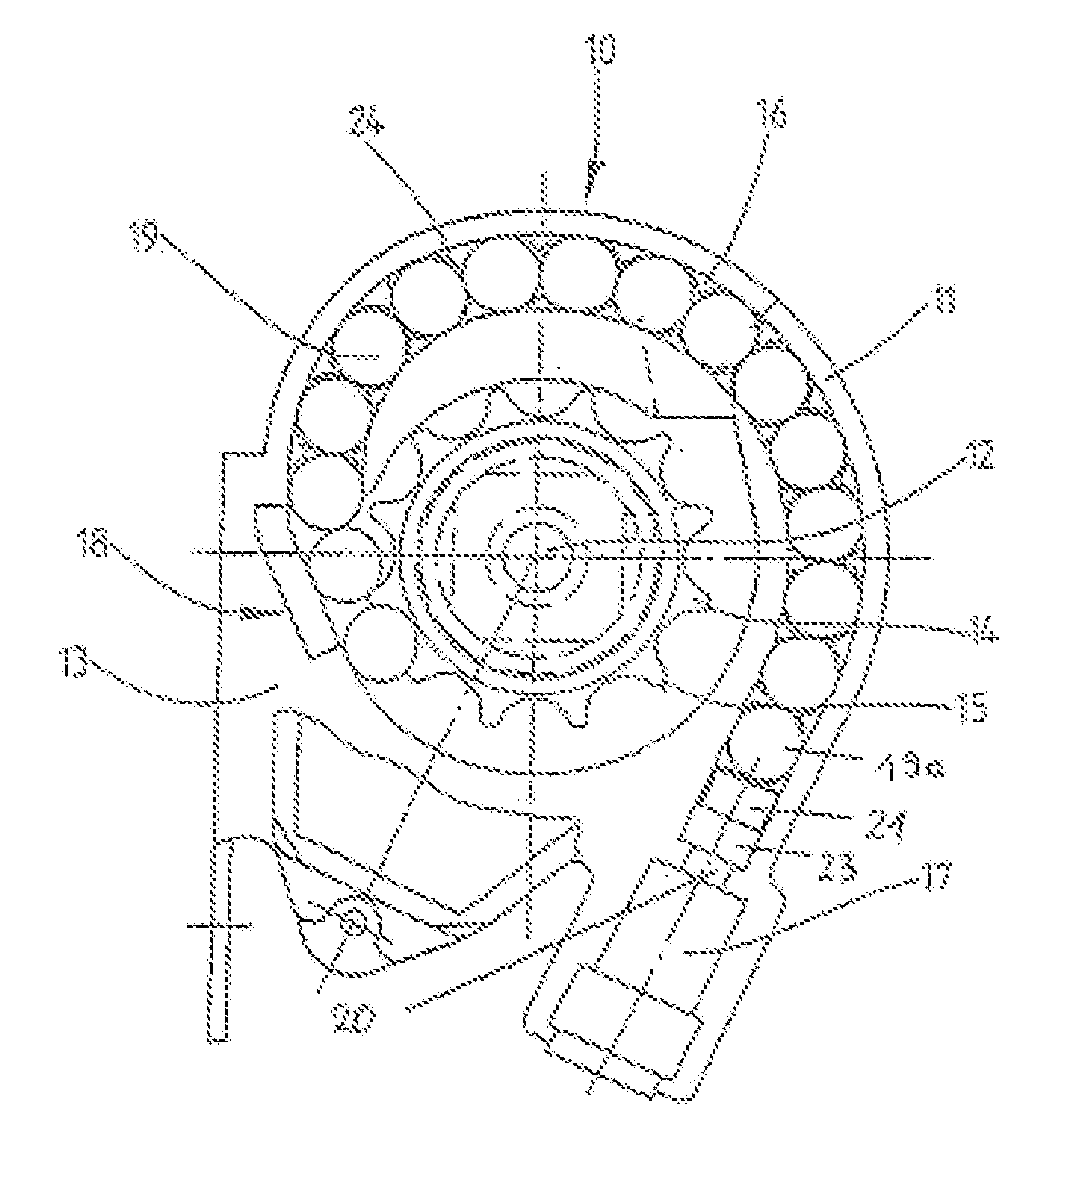 Tensioning Device for a Safety Belt